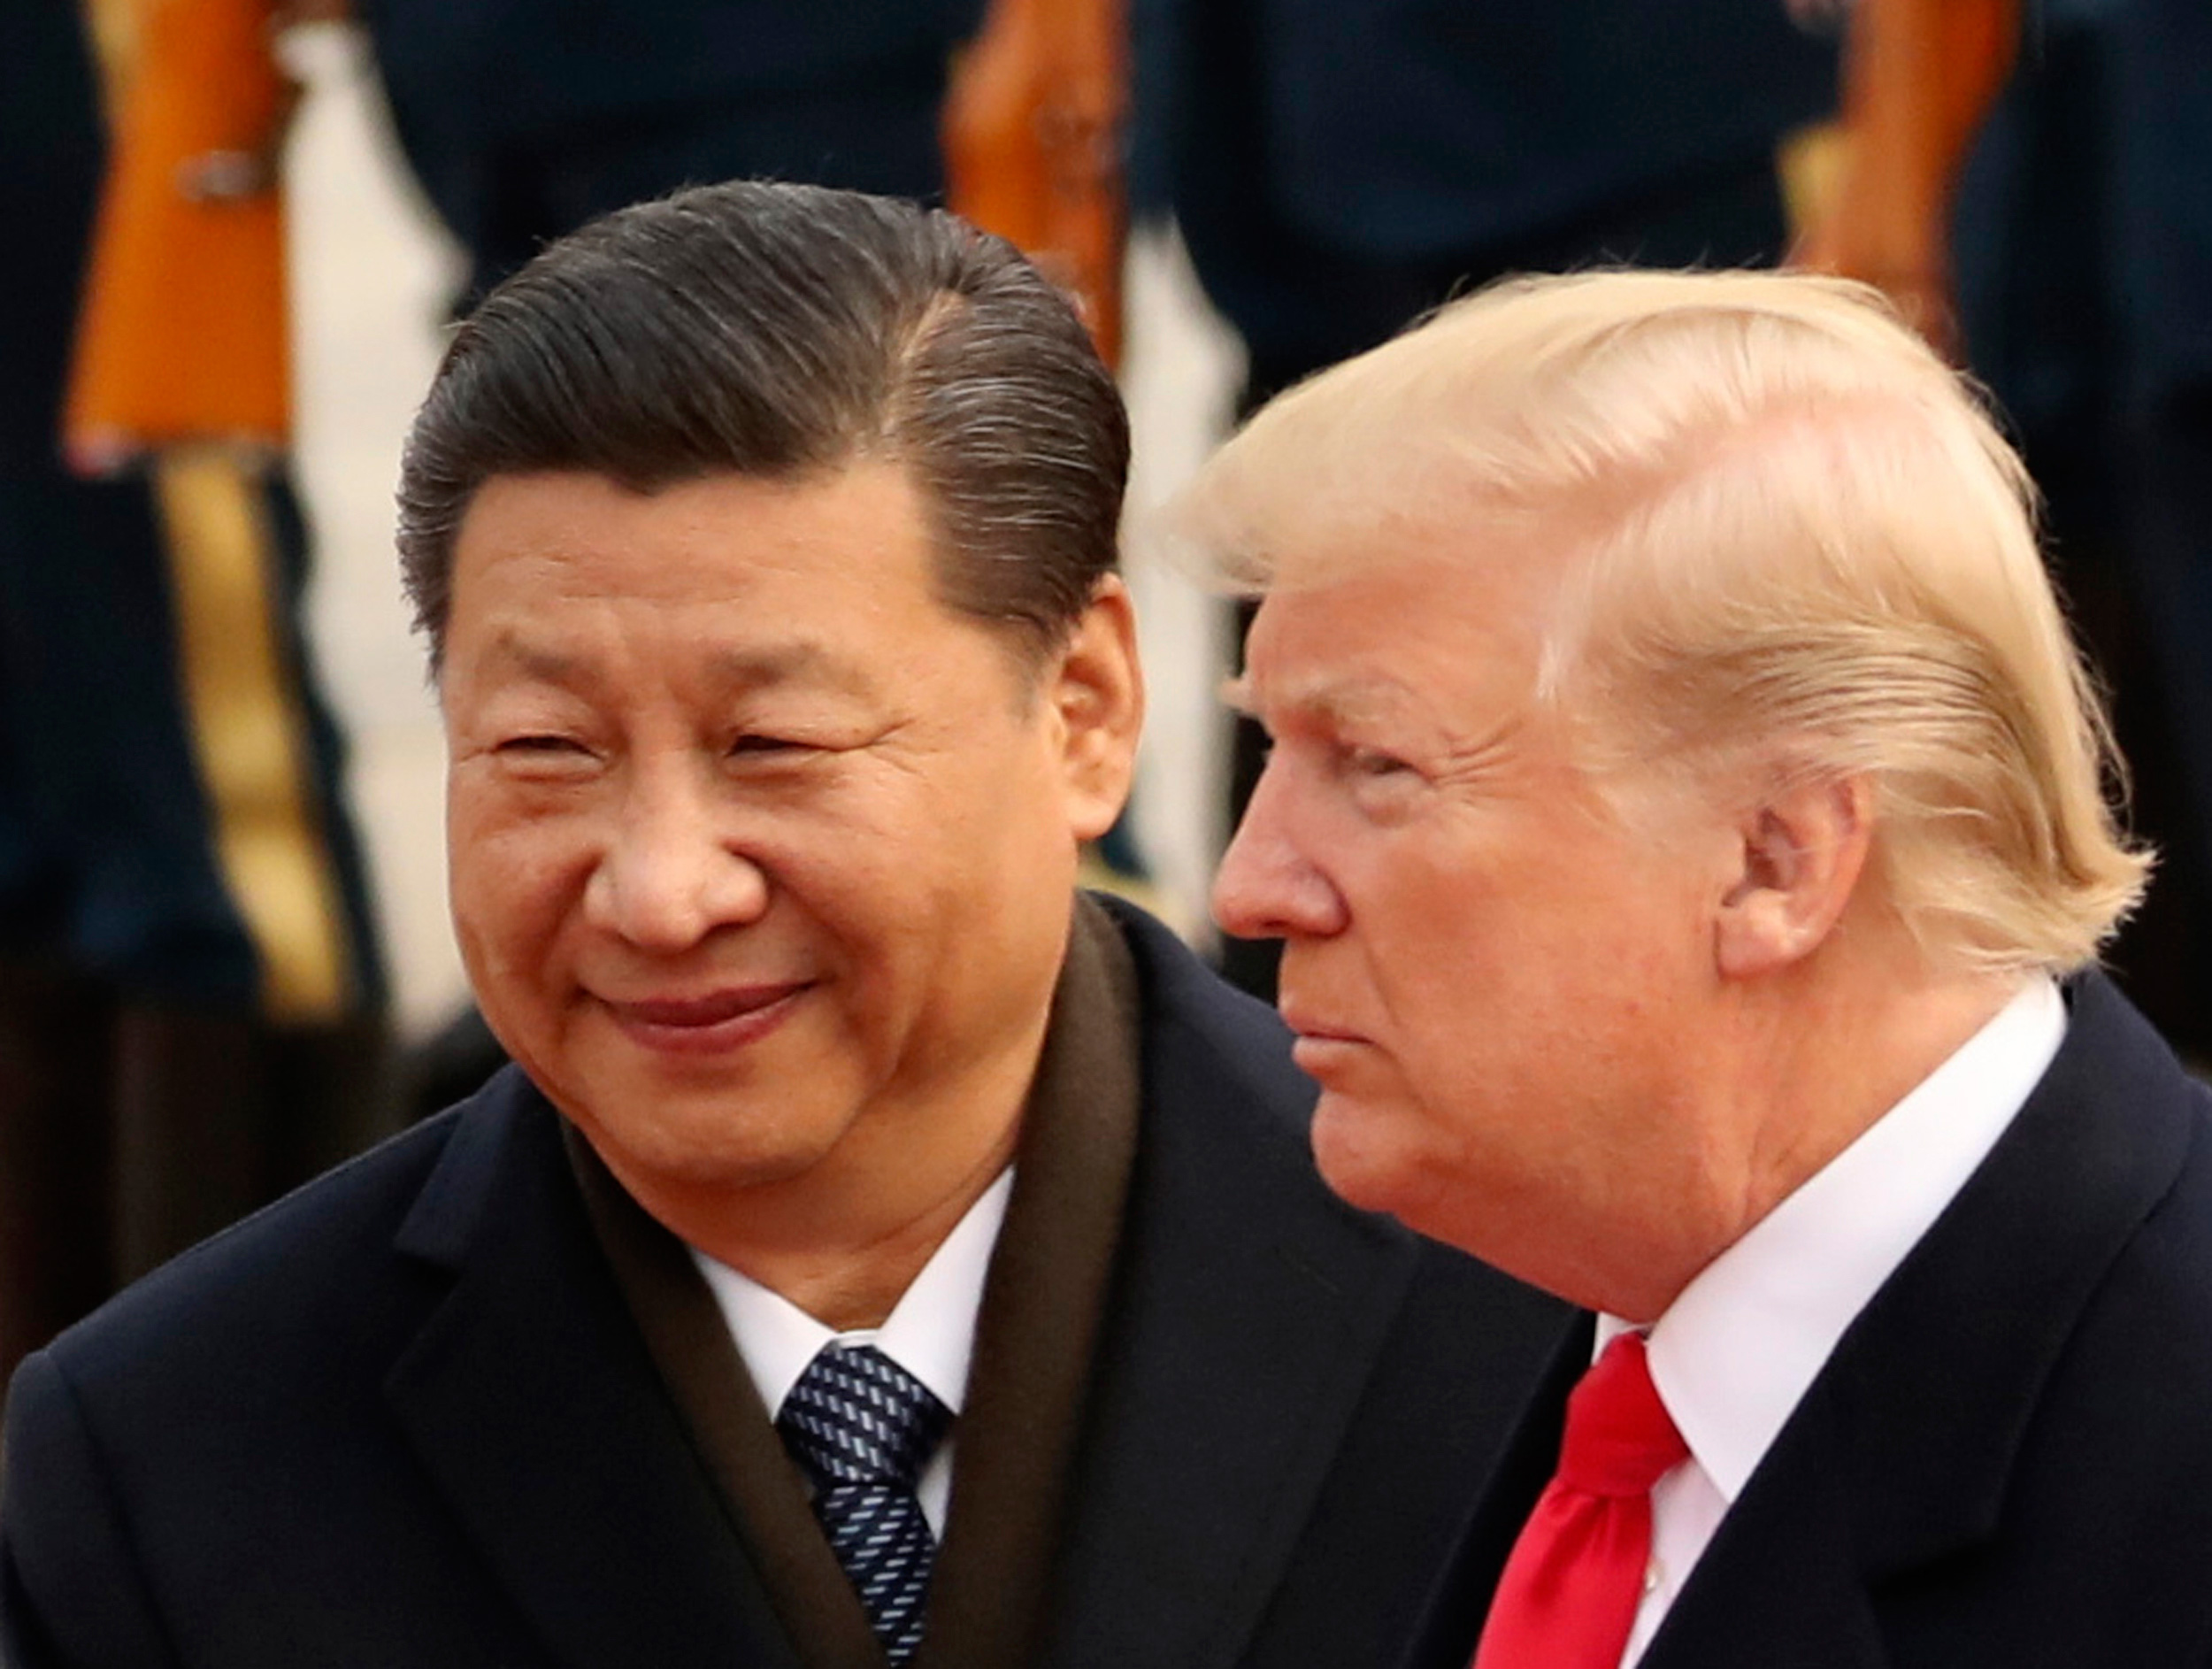 The Trump administration's China trade policy is confusing everyone